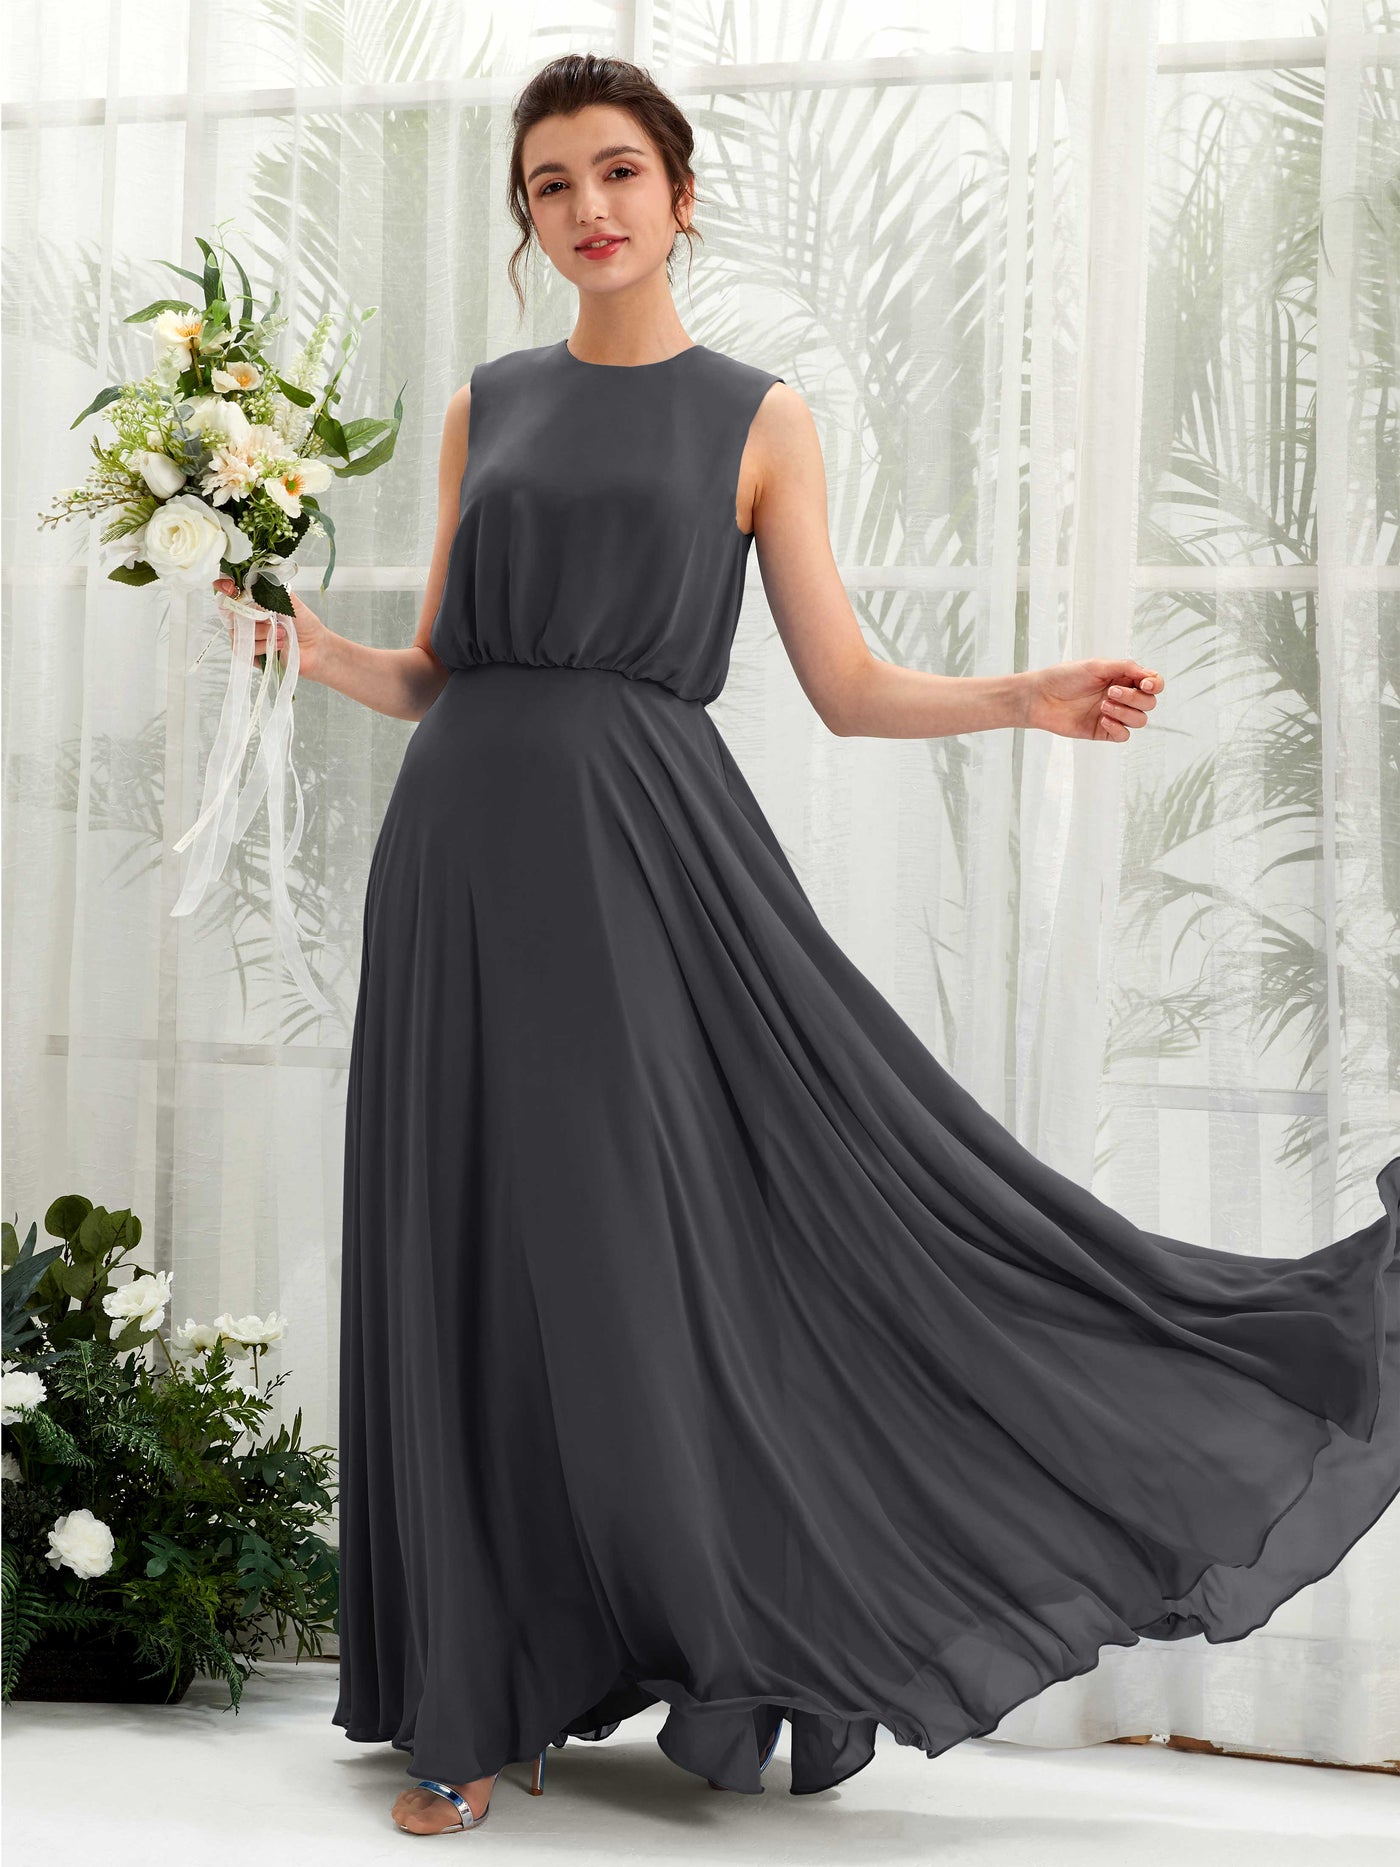 Pewter Bridesmaid Dresses Bridesmaid Dress A-line Chiffon Round Full Length Sleeveless Wedding Party Dress (81222838)#color_pewter